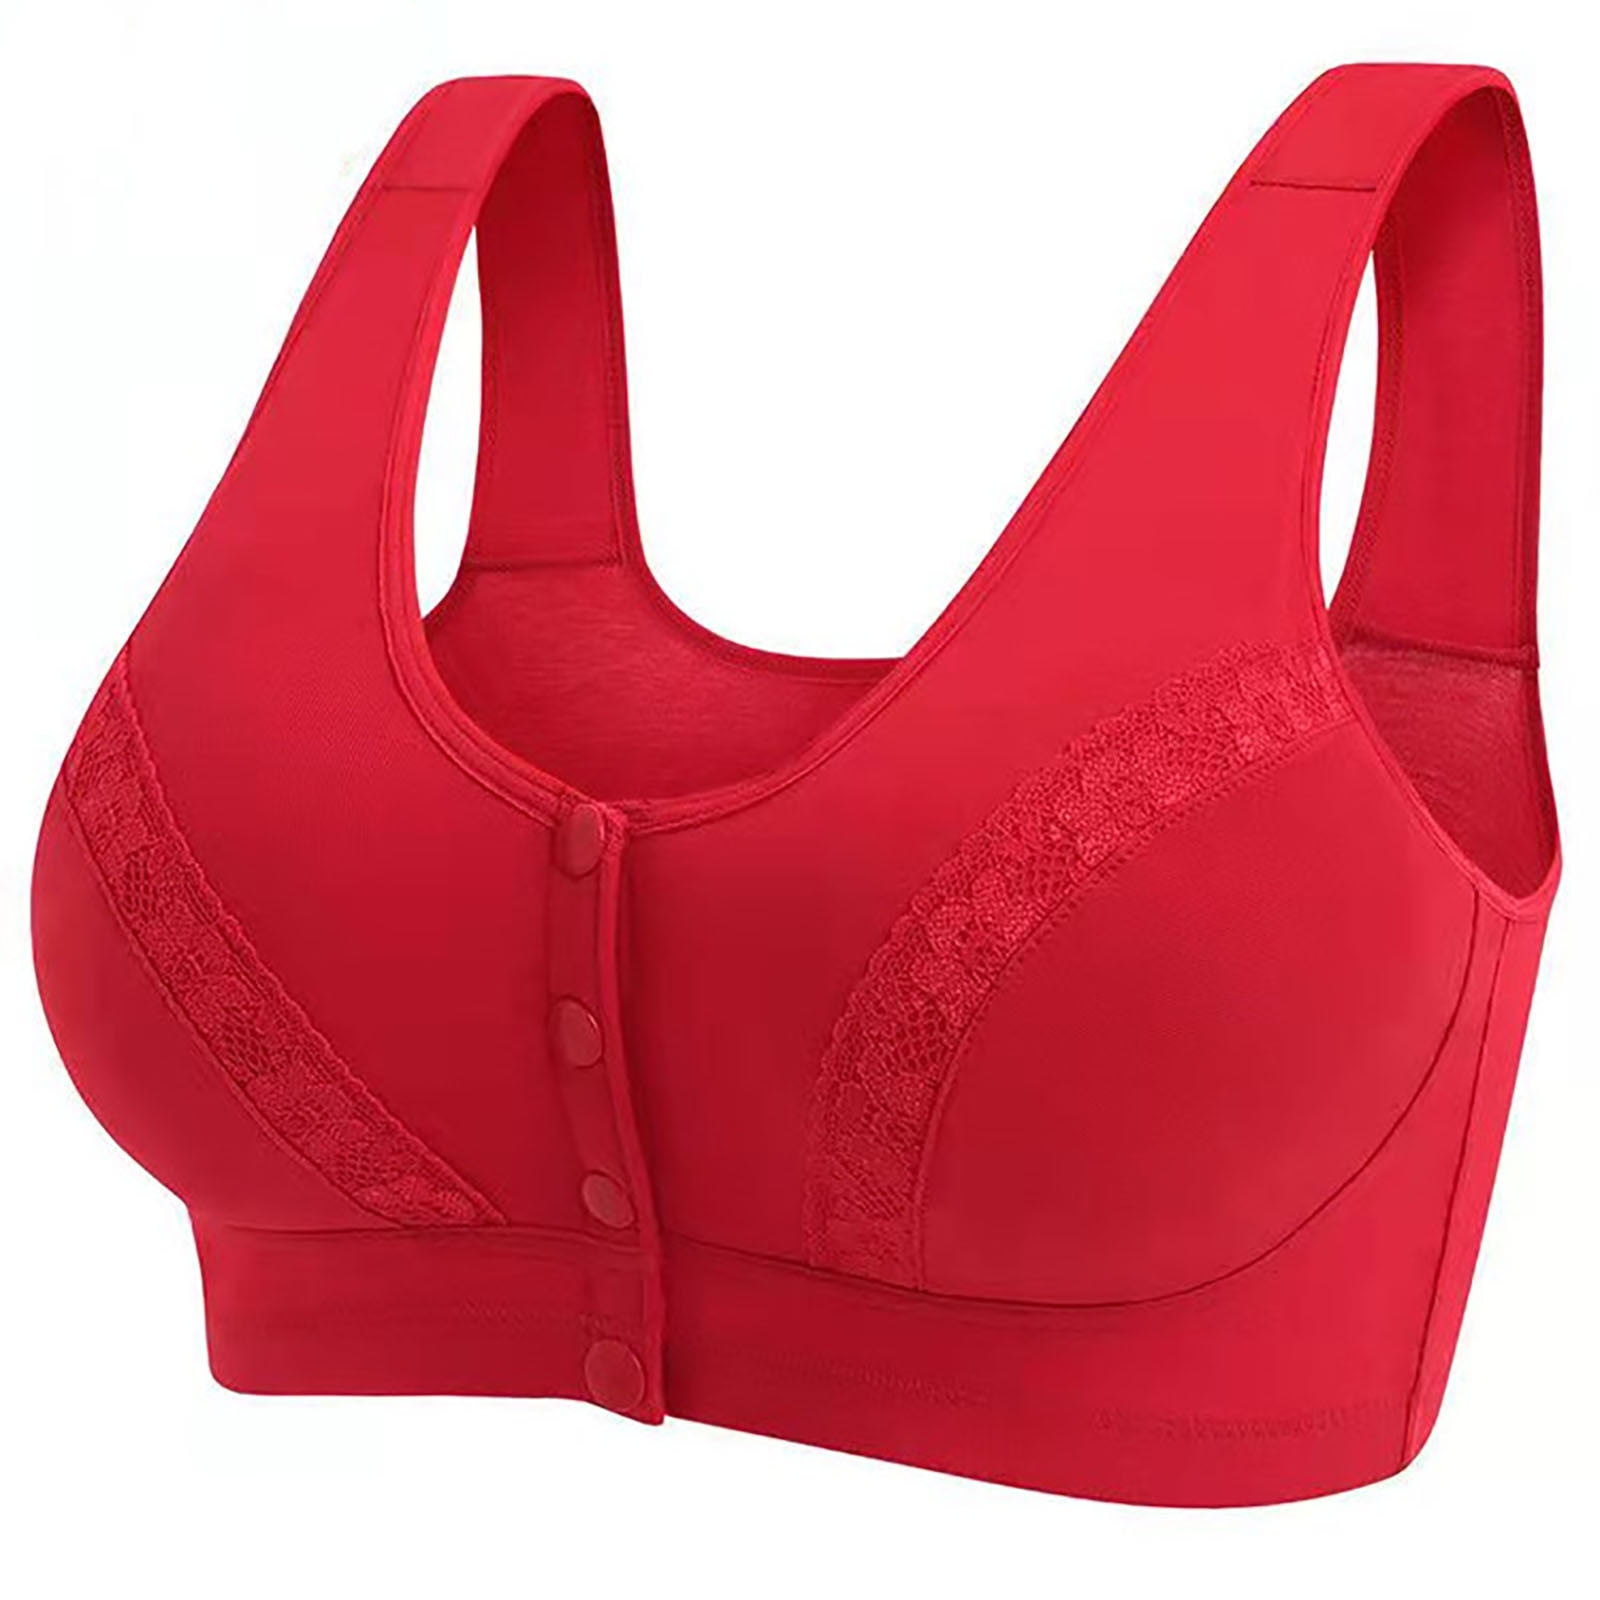 KBODIU Everyday Bras for Women, Plus Size Comfort Bras, Ultimate Comfort  Lift Wirefree Bra,Sexy Lace Front Button Shaping Cup Shoulder Strap  Extra-Elastic Bras 